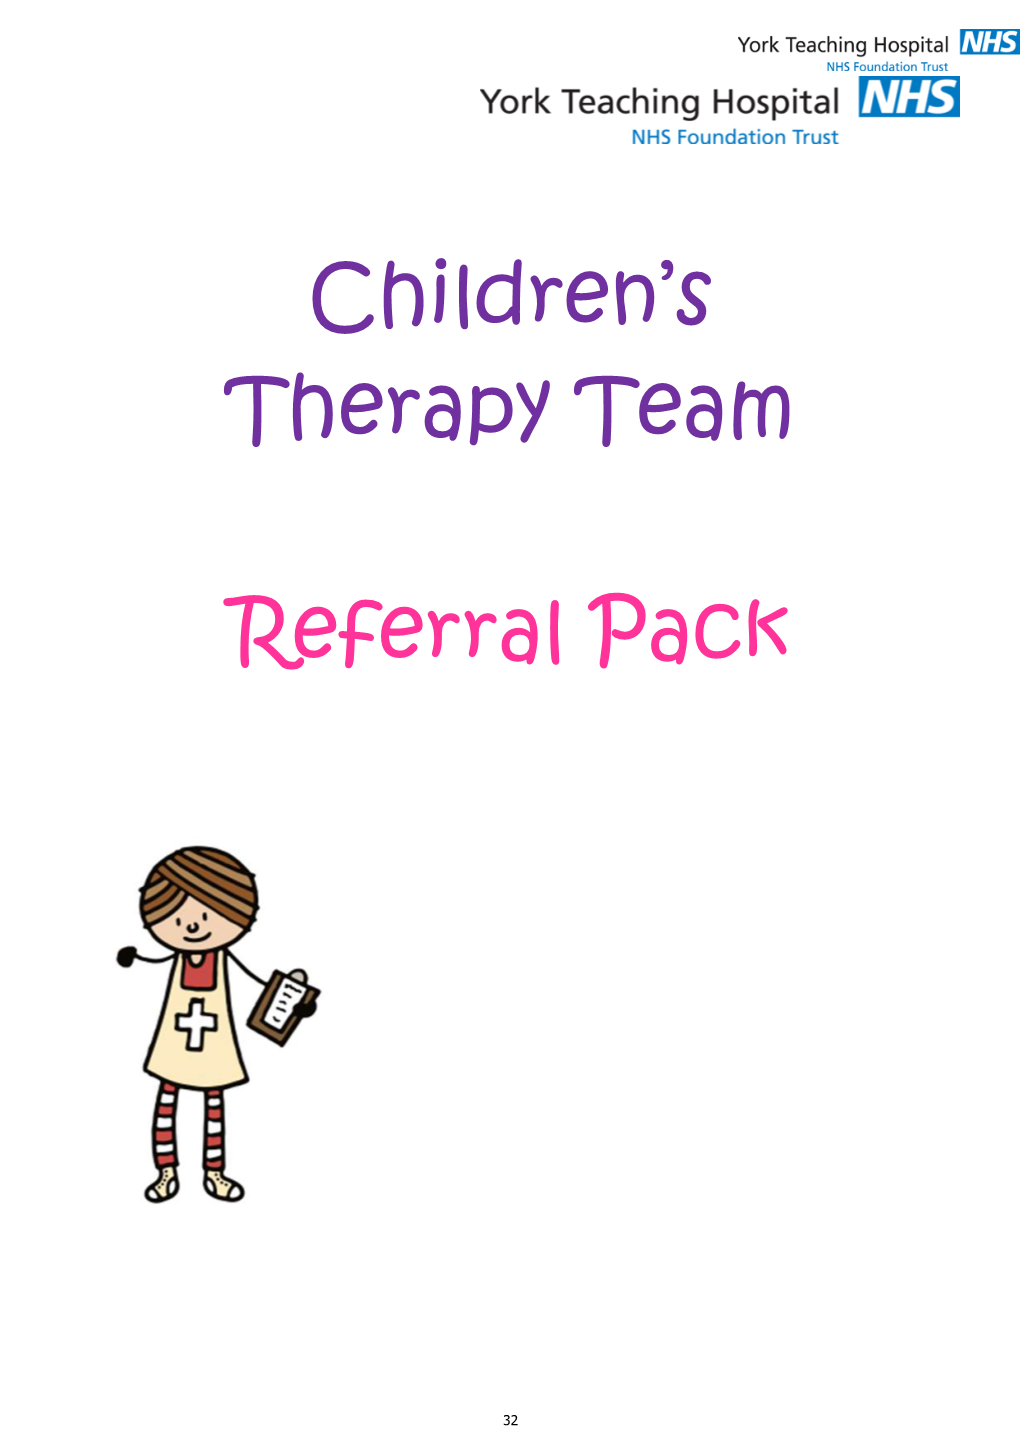 Children's Therapy Team Referral Pack